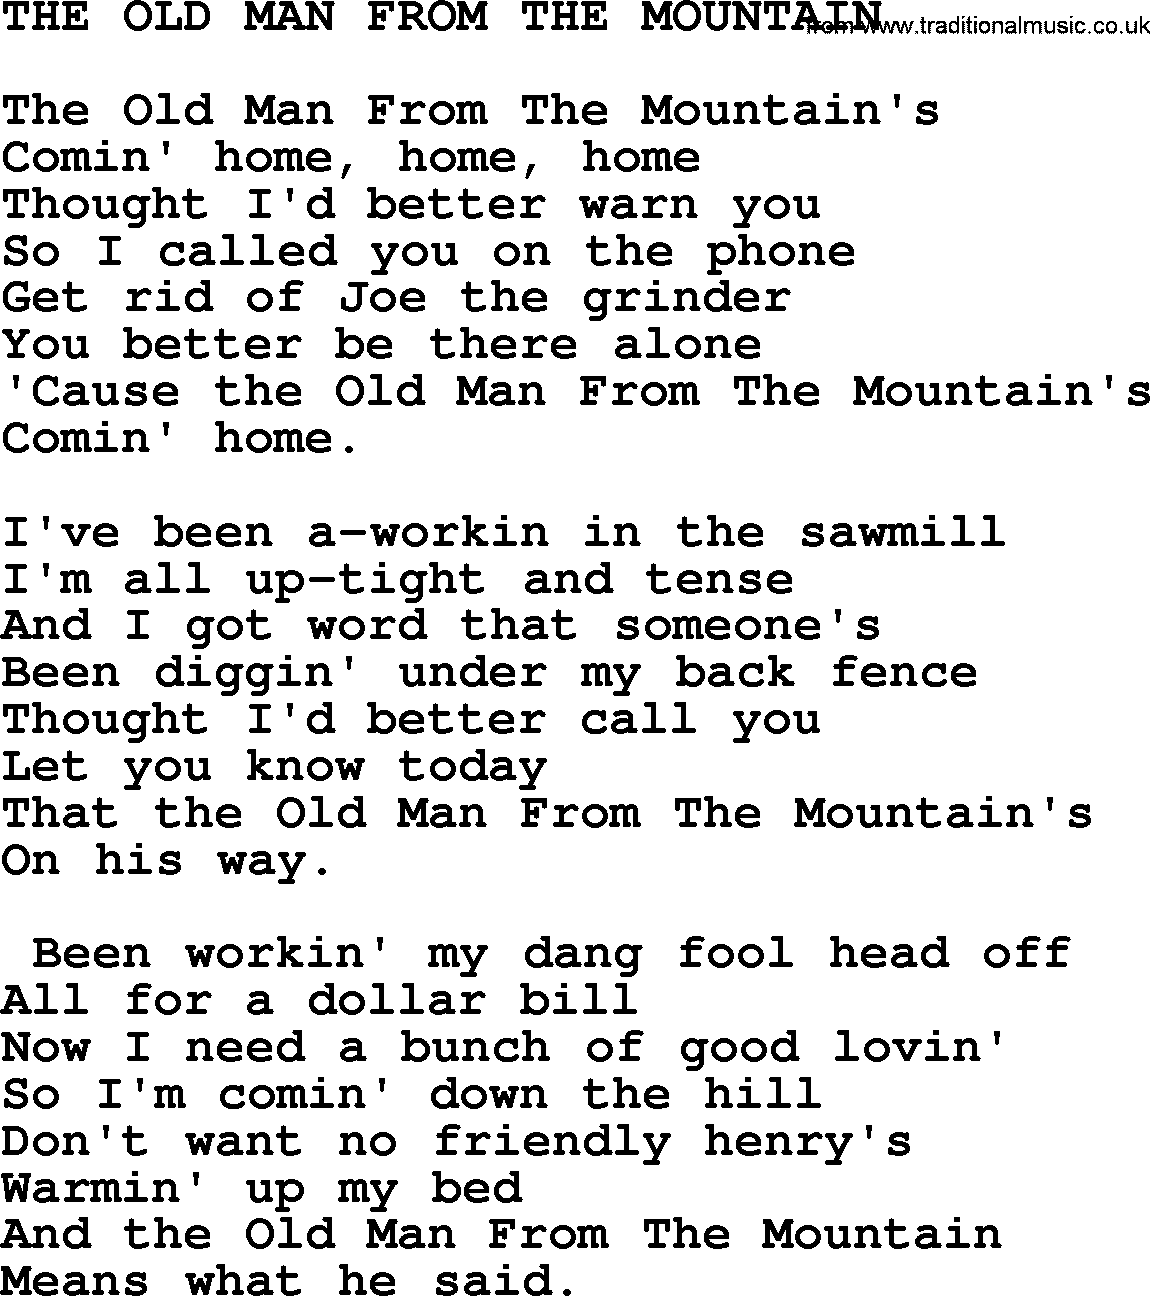 Merle Haggard song: The Old Man From The Mountain, lyrics.